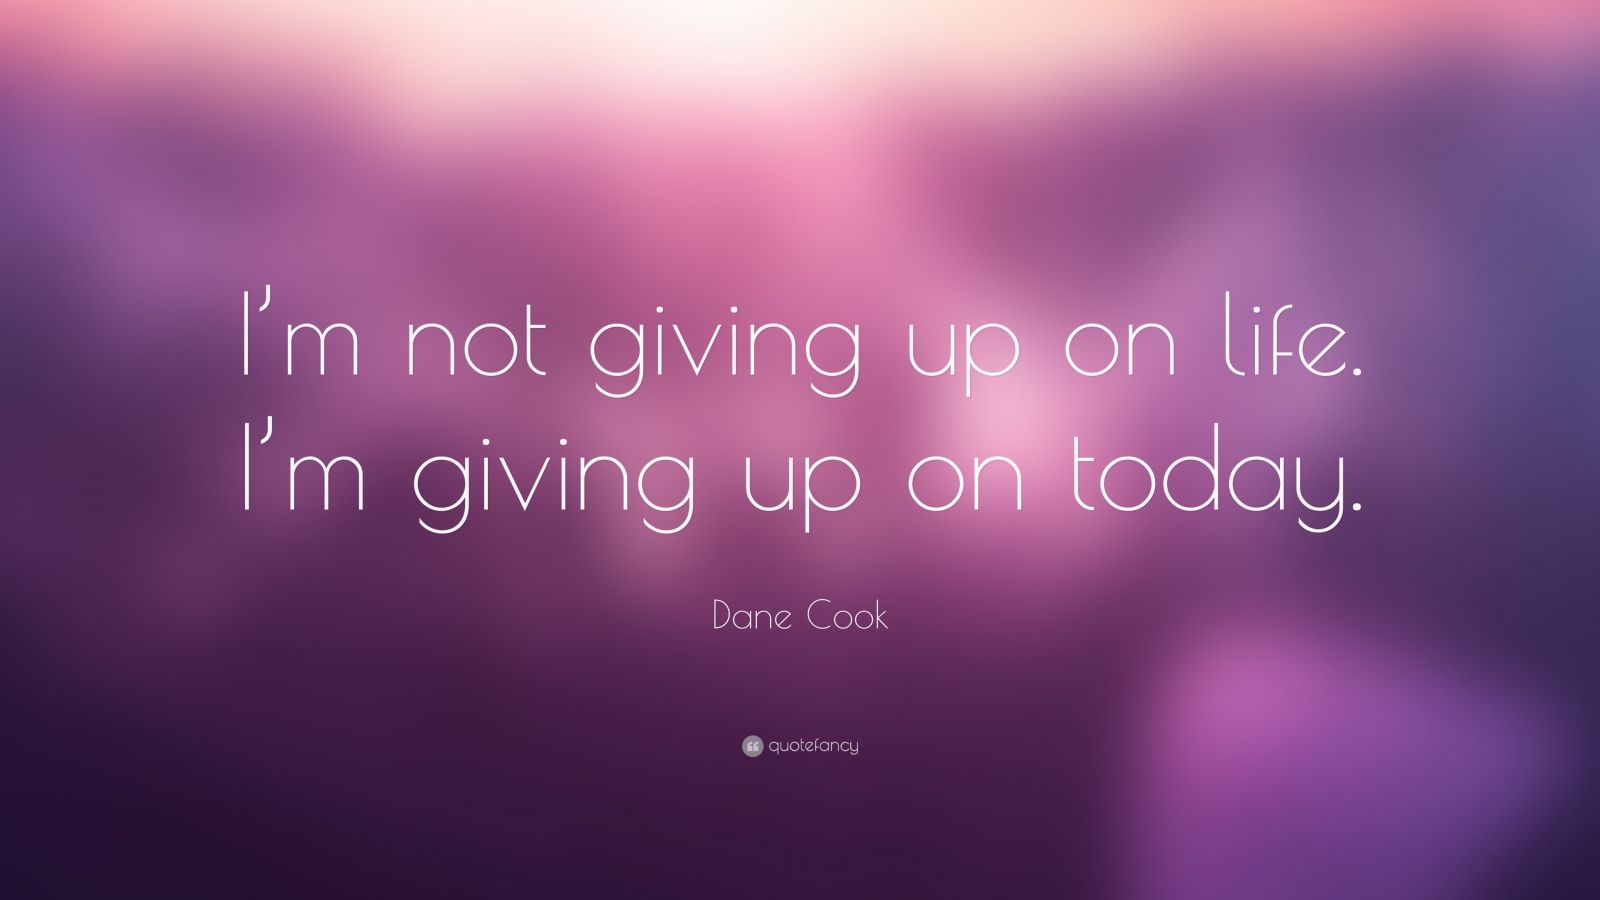 Top 30 Not Giving Up Quotes | 2021 Edition | Free Images - QuoteFancy